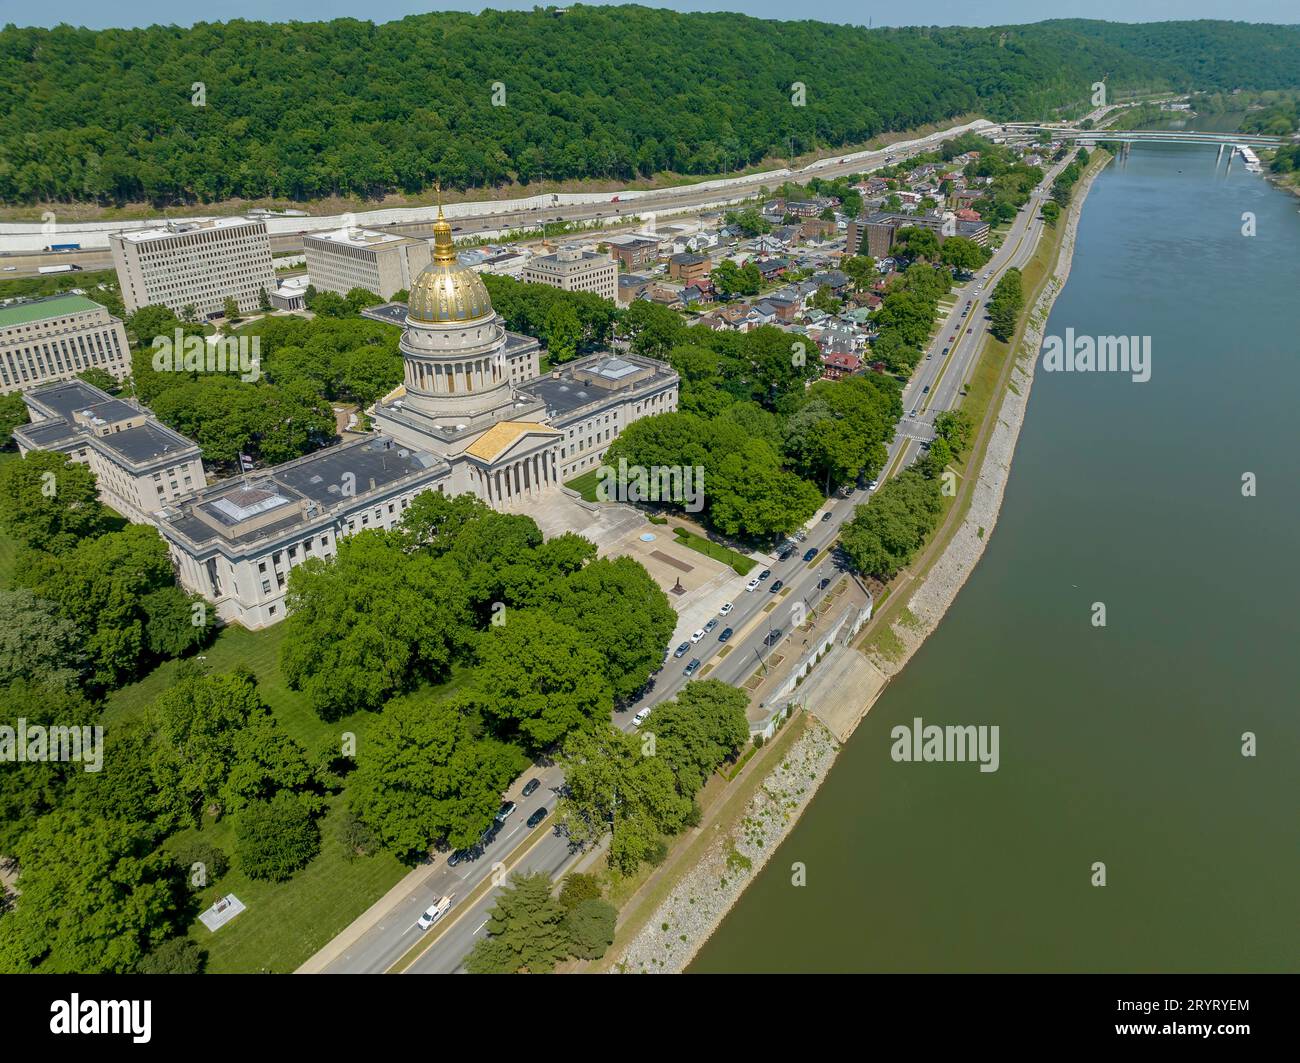 Aerial View Of The West Virginia State Capitol Building And Grounds Stock Photo